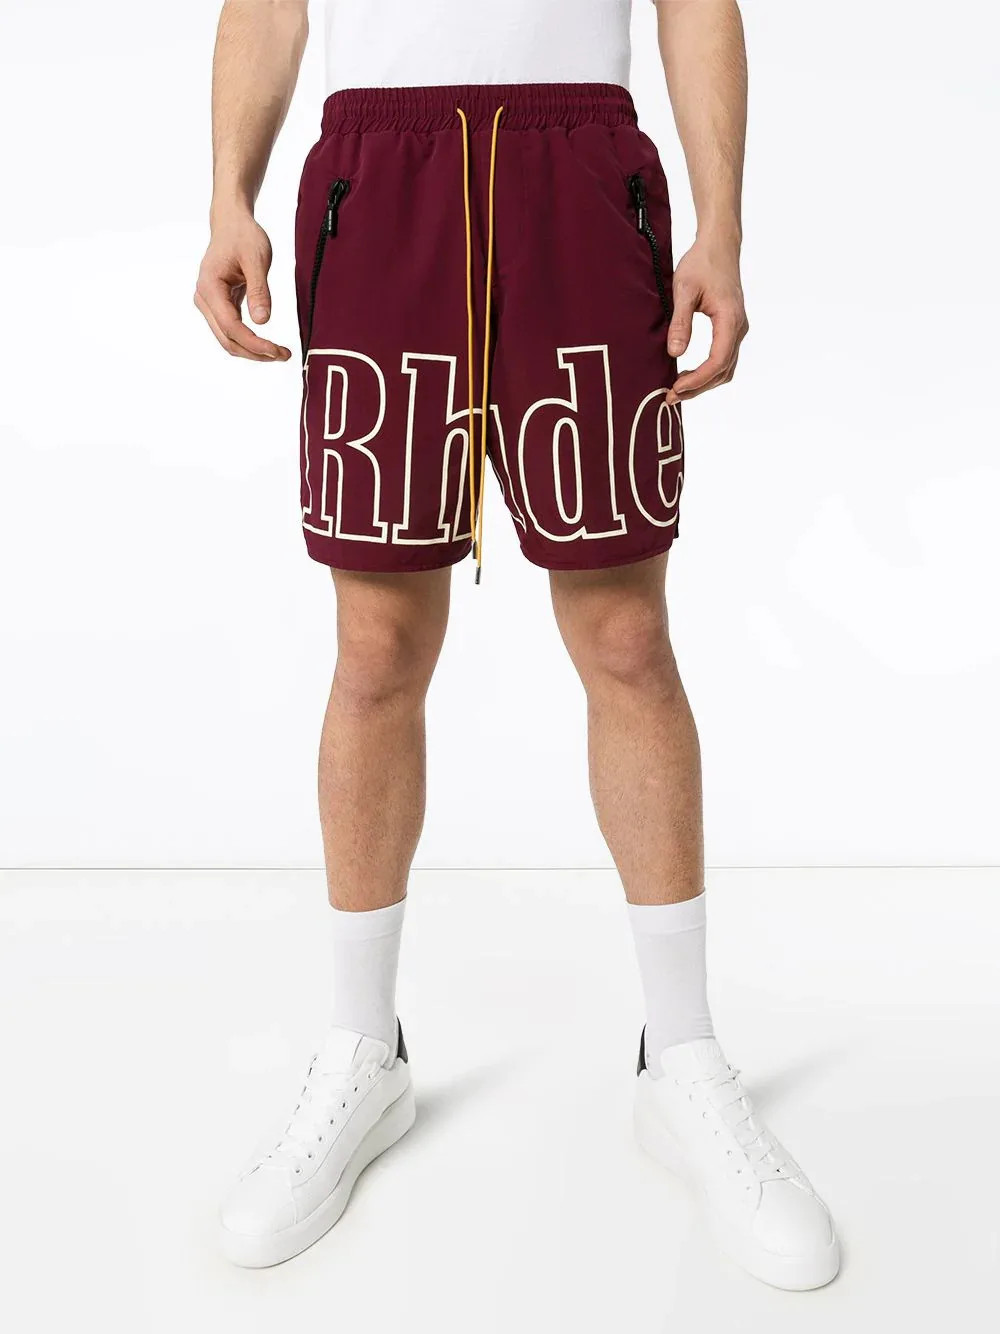 

New 2021 Muscle Brothers' new summer sports shorts for men's casual outdoor quick-dry basketball five-cent pants